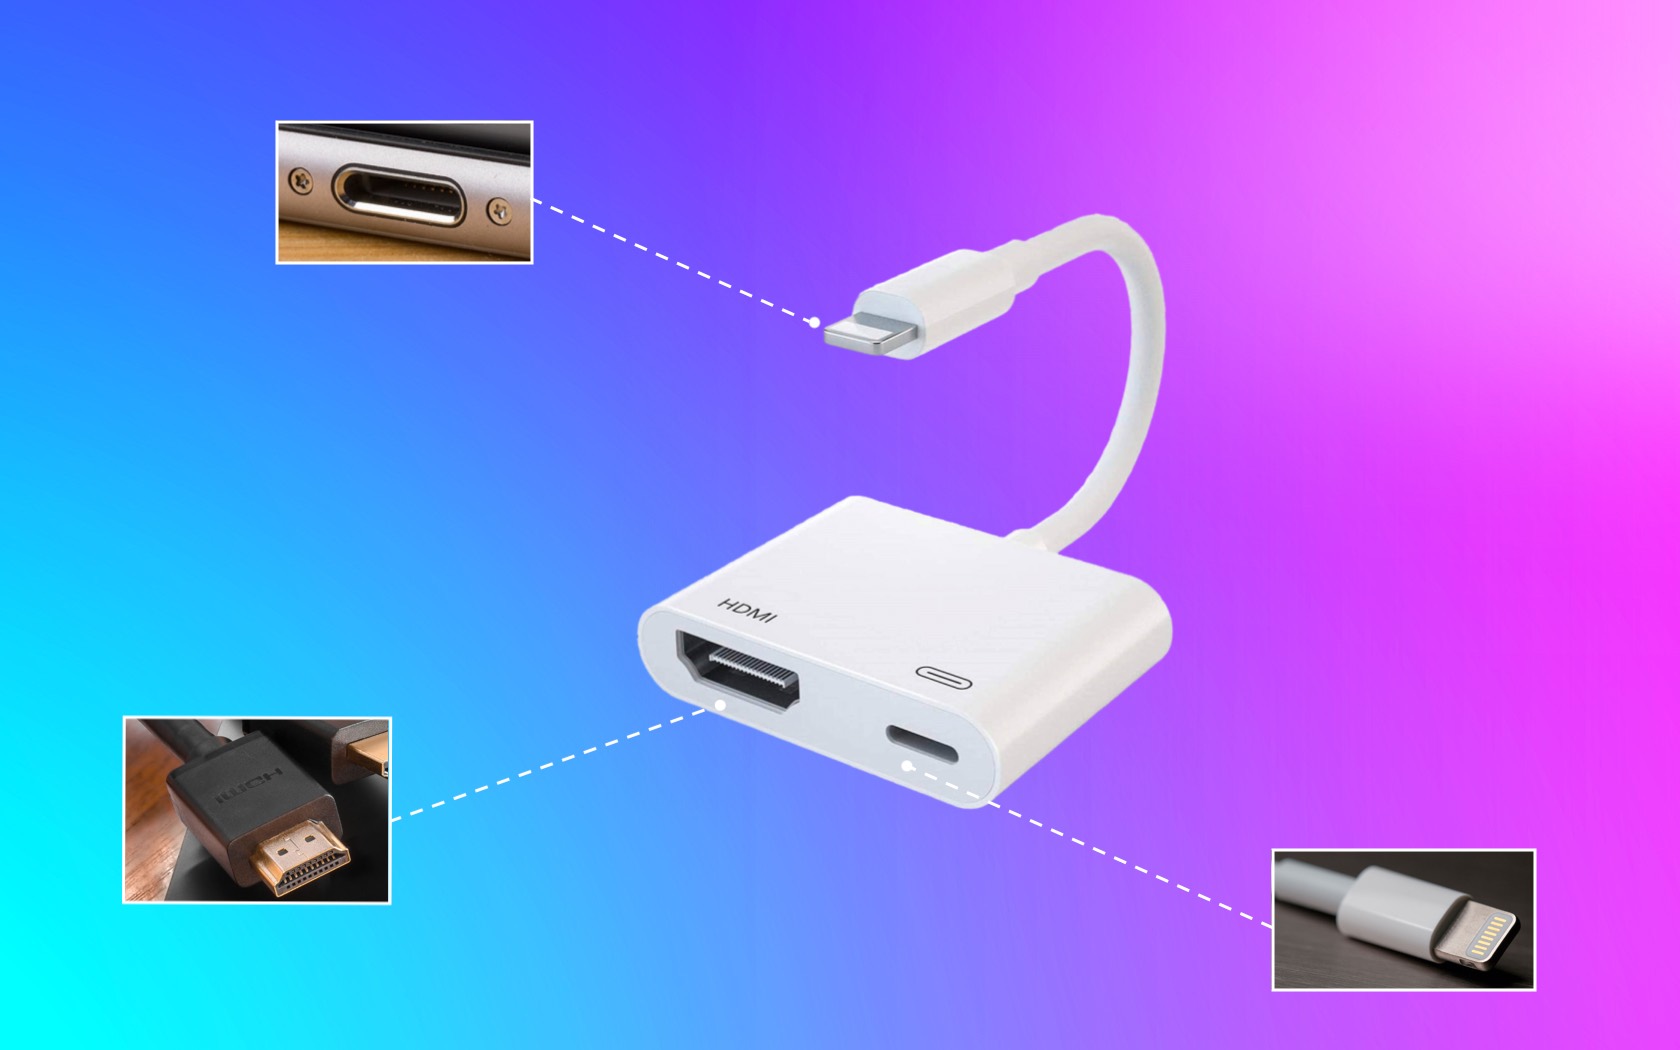 Use Lightning to HDMI adapter to connect your iPhone to TV